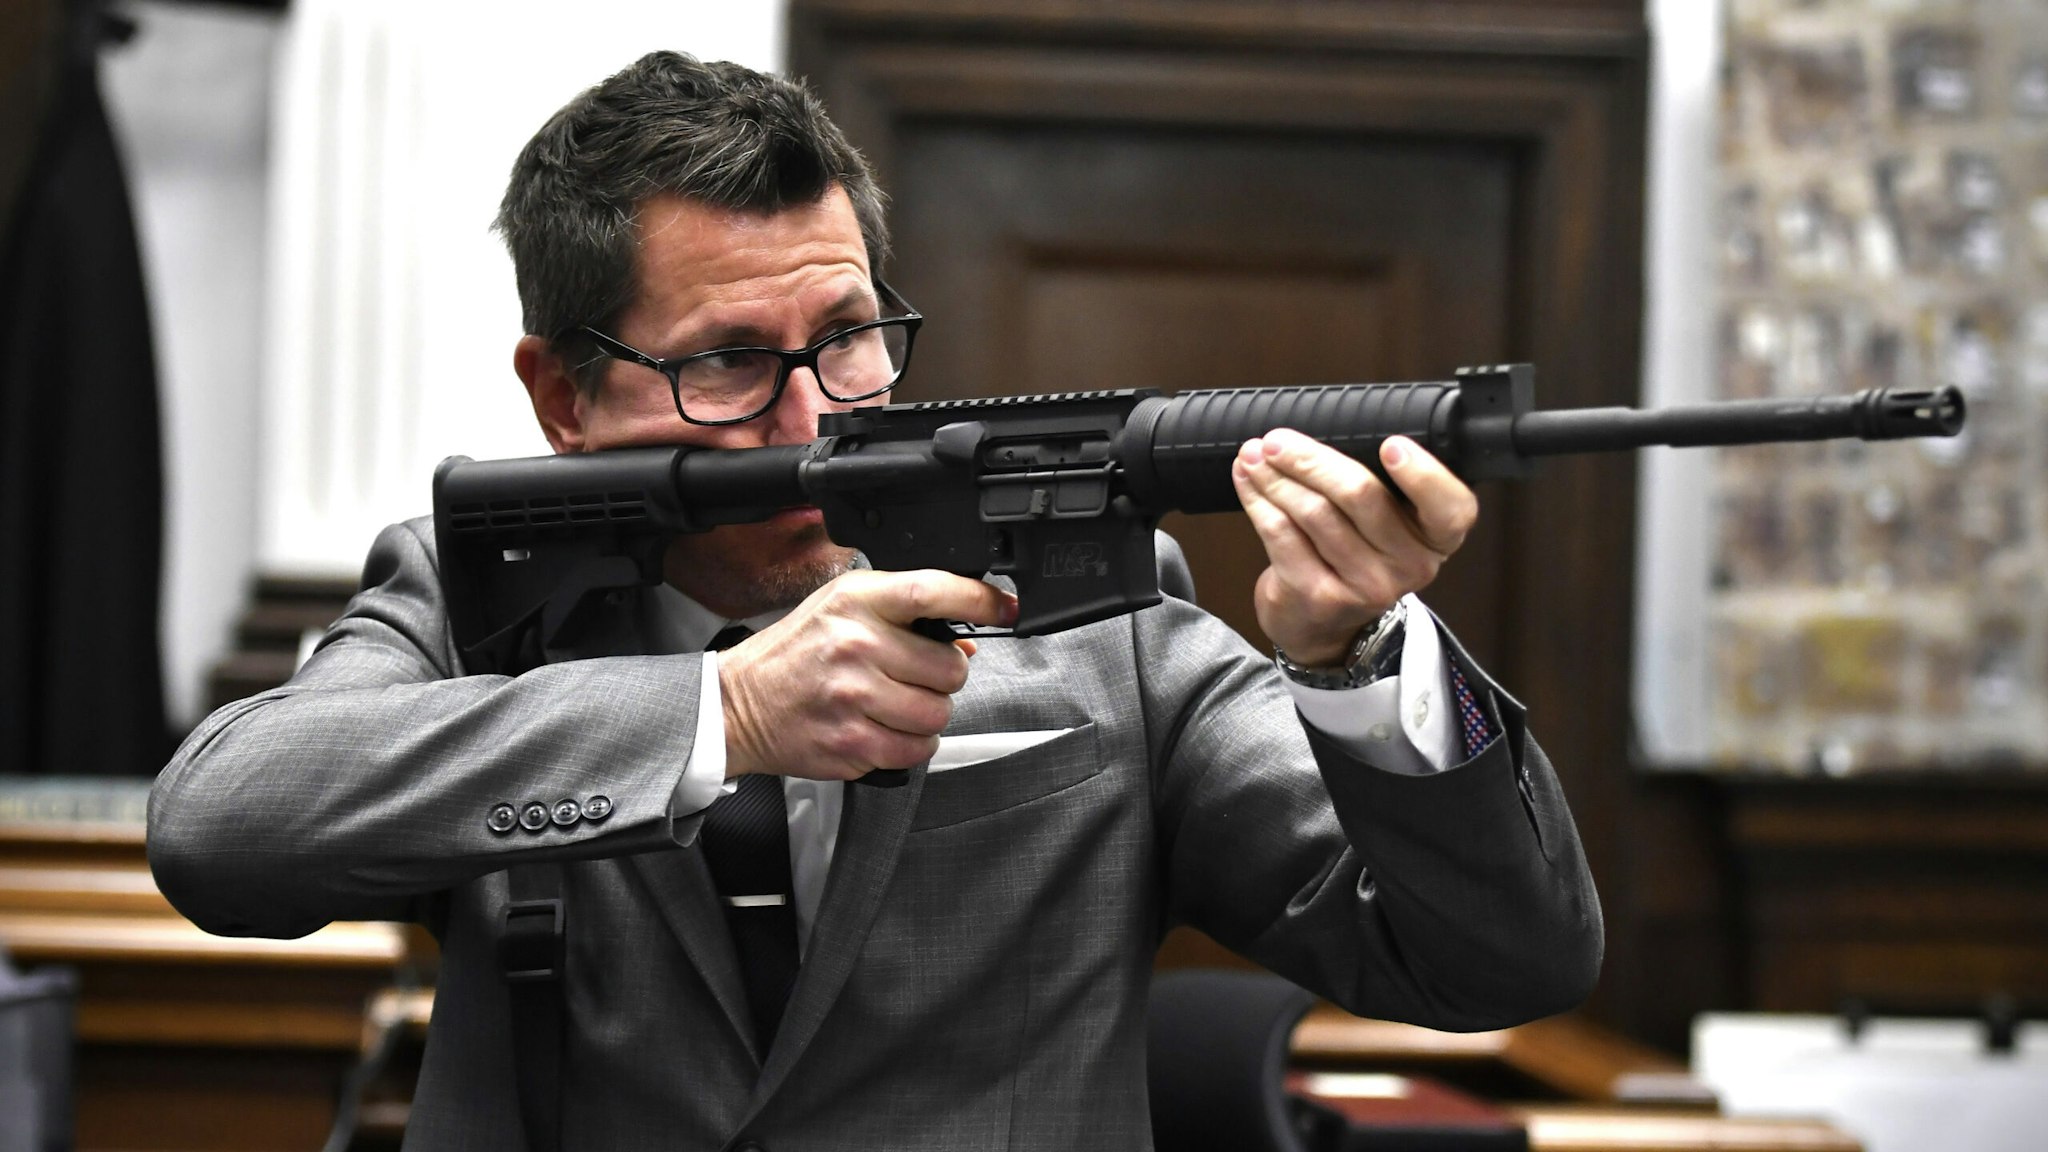 KENOSHA, WISCONSIN - NOVEMBER 15: Assistant District Attorney Thomas Binger holds Kyle Rittenhouse's gun as he gives the state's closing argument in Kyle Rittenhouse's trial at the Kenosha County Courthouse on November 15, 2021 in Kenosha, Wisconsin. Rittenhouse is accused of shooting three demonstrators, killing two of them, during a night of unrest that erupted in Kenosha after a police officer shot Jacob Blake seven times in the back while being arrested in August 2020. Rittenhouse, from Antioch, Illinois, was 17 at the time of the shooting and armed with an assault rifle. He faces counts of felony homicide and felony attempted homicide.